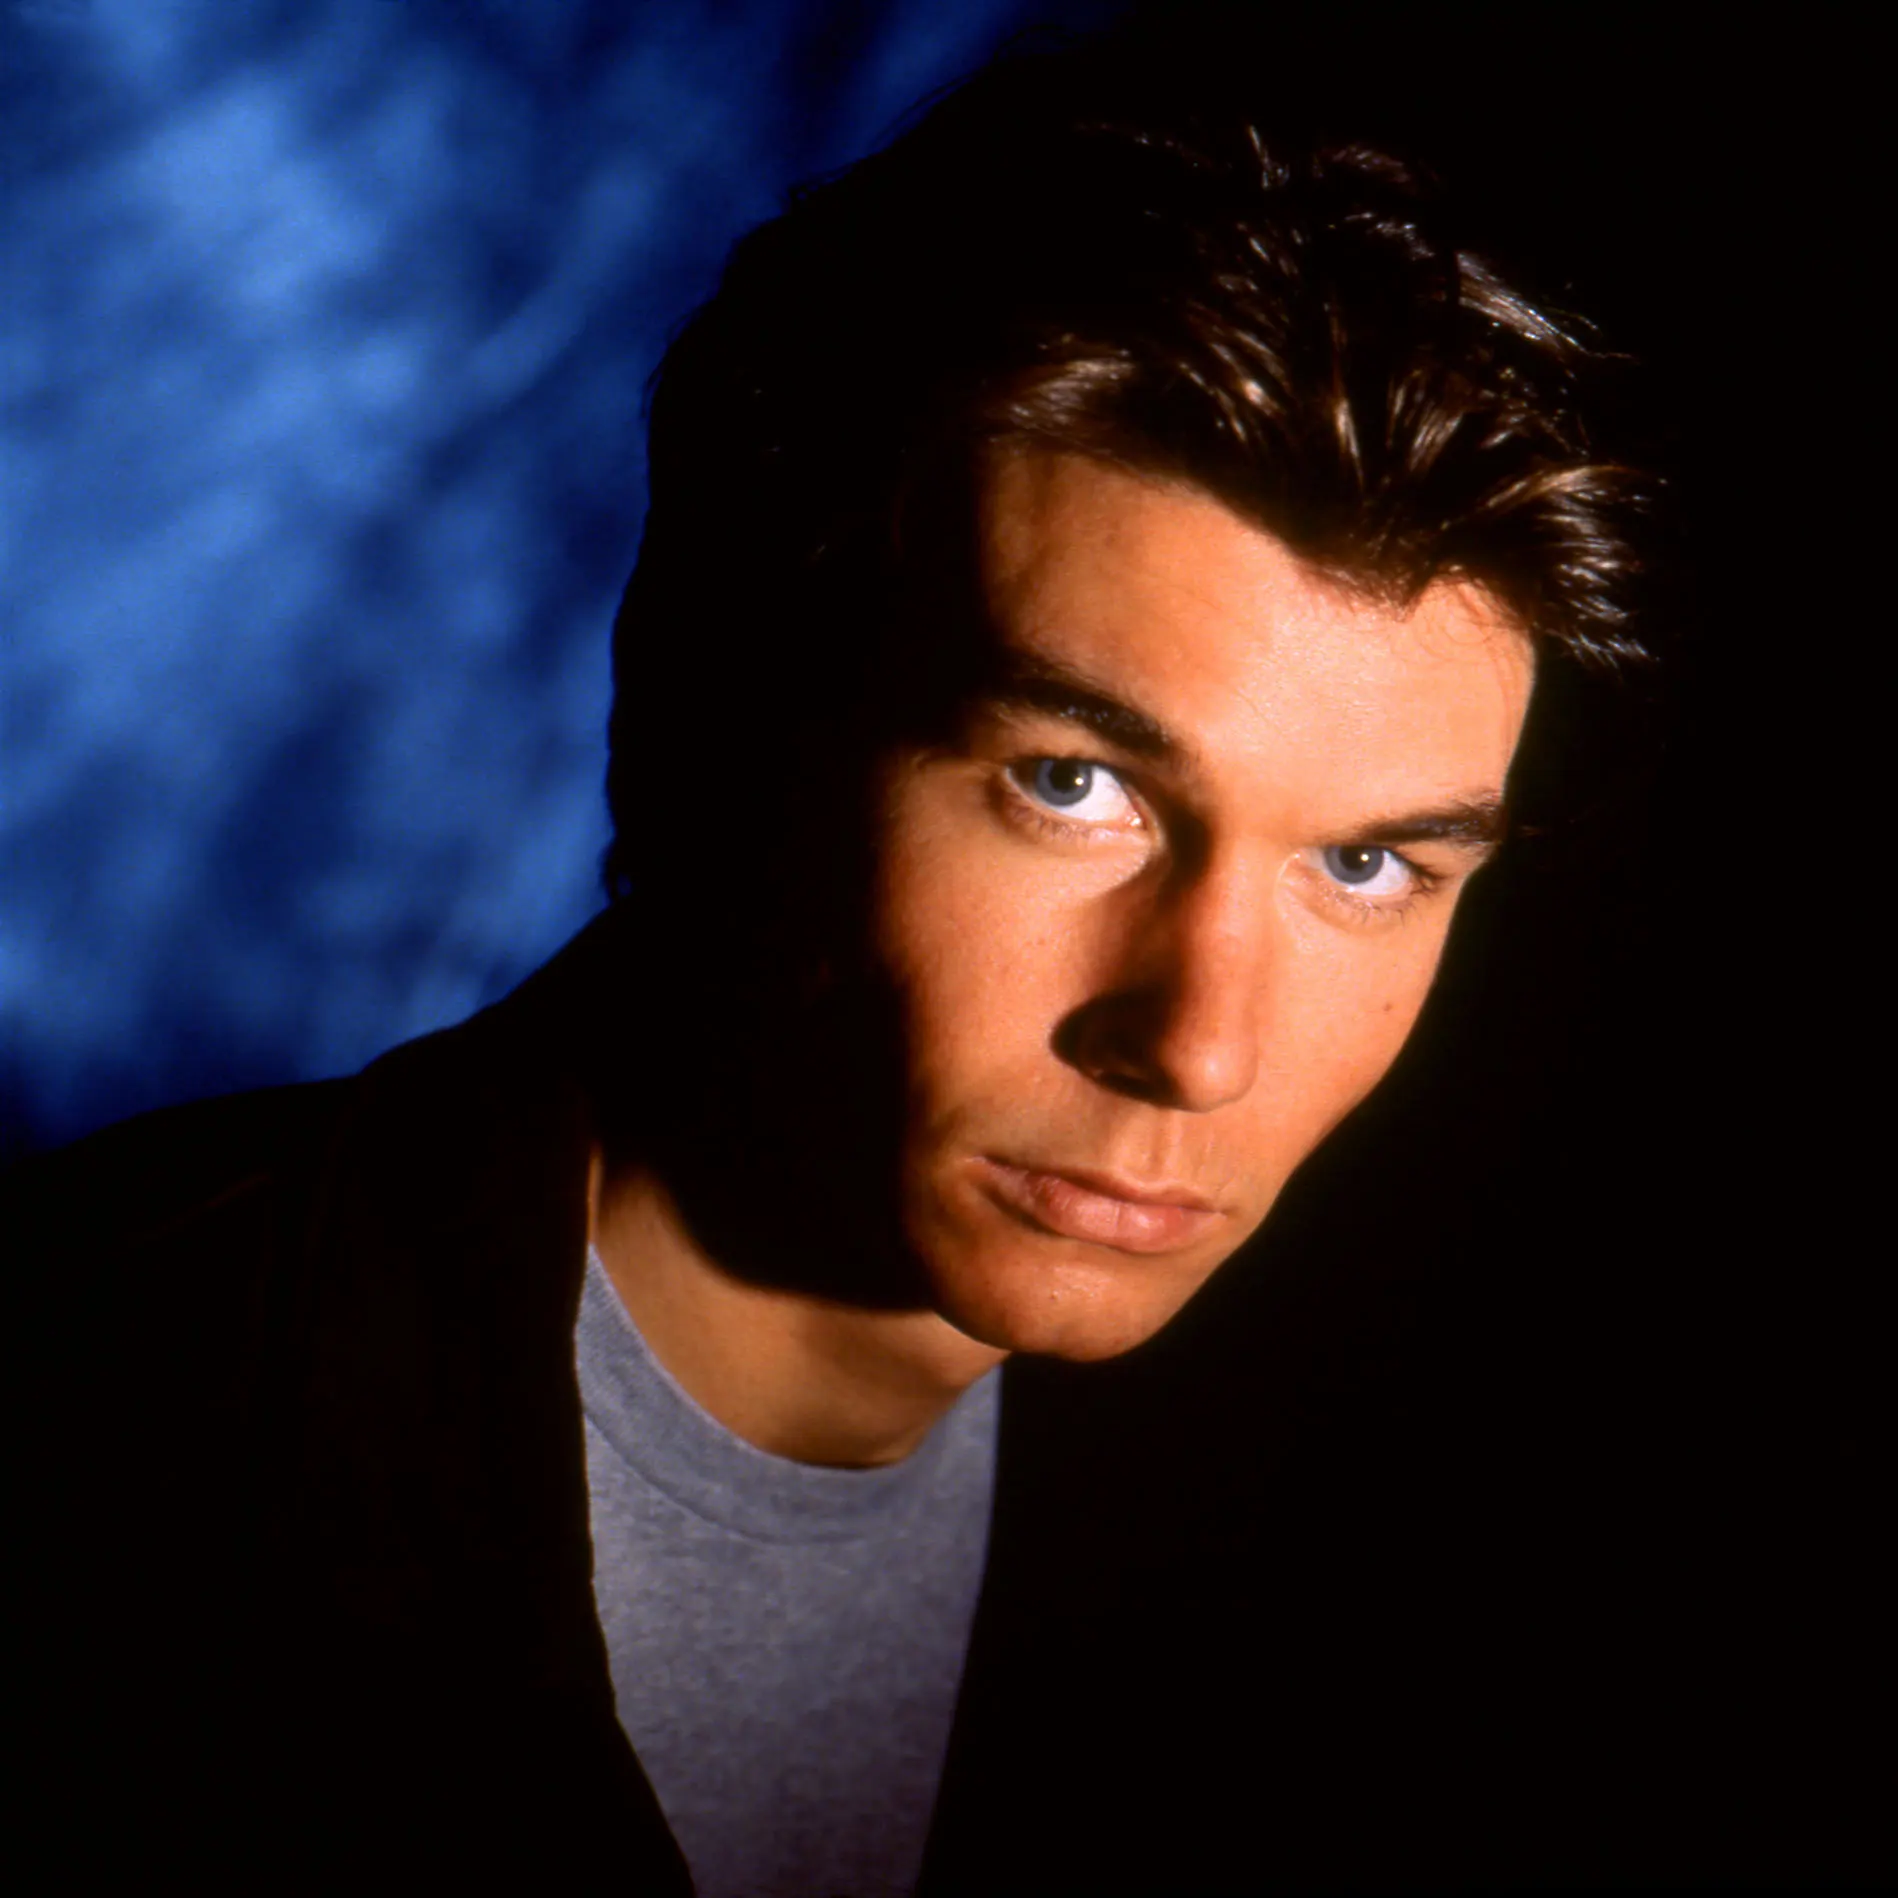 Semi-profile of Jerry O'Connell as Quinn Mallory from the sci-fi TV show Sliders